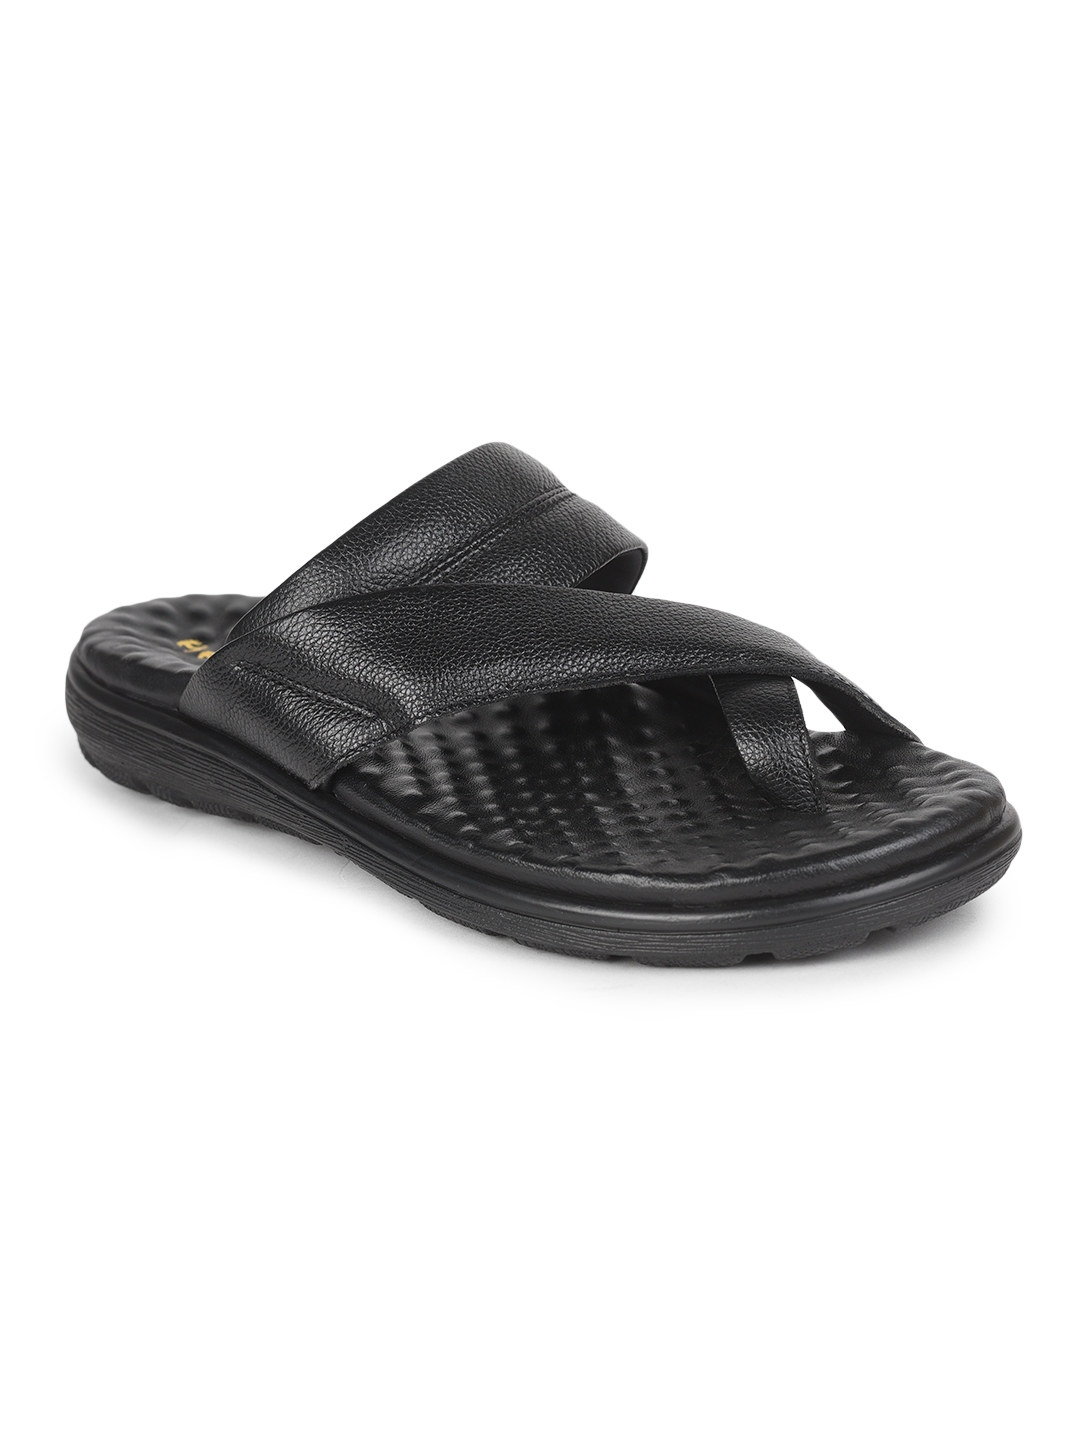 Liberty | Healers by Liberty Slippers Black SSL-112 For :- Mens